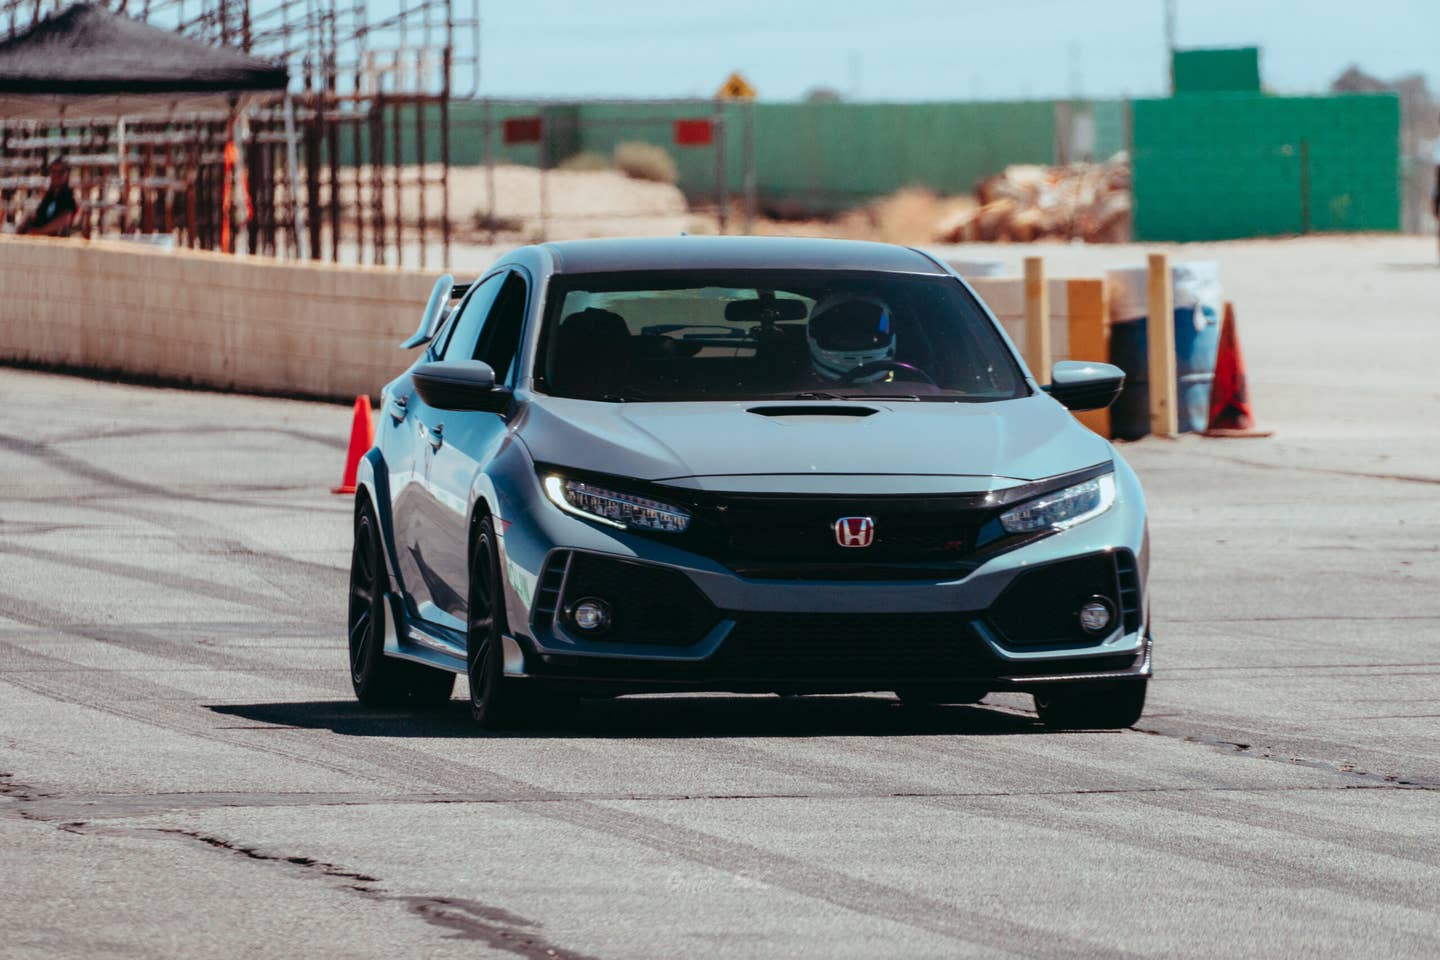 What Learned I About My Civic Type R at Its First Track Day